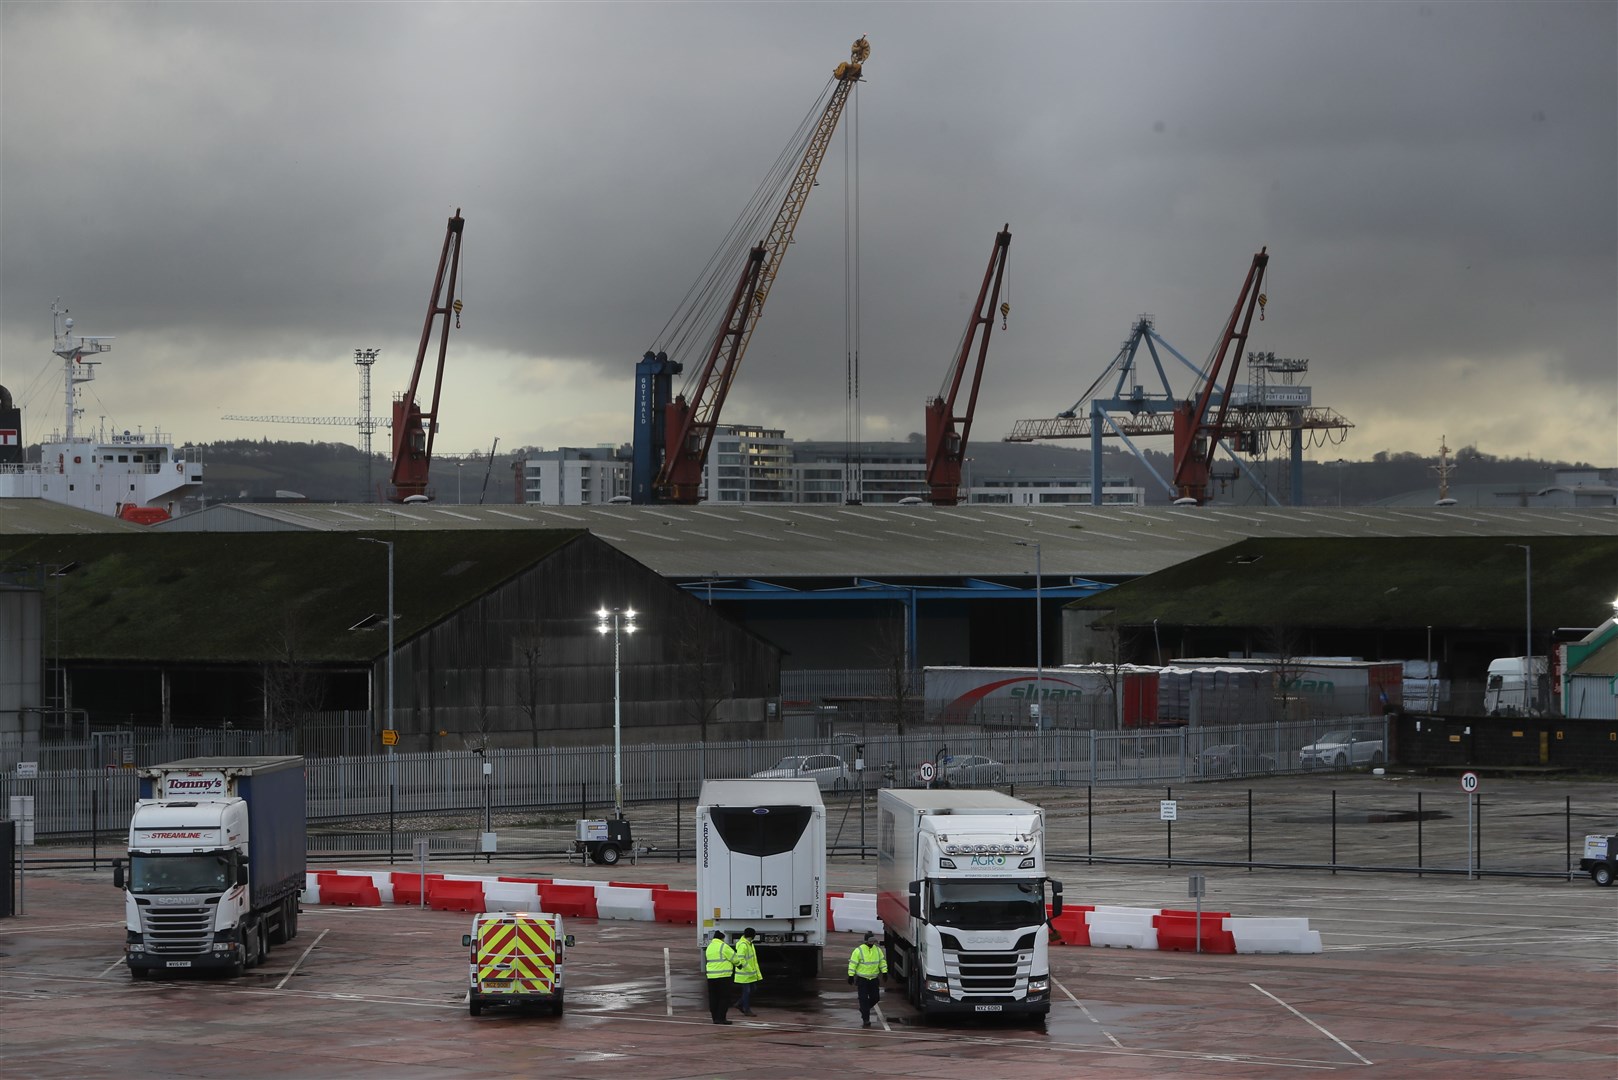 Lorries at the Department of Agriculture, Environment and Rural Affairs site near Belfast port (Brian Lawless/PA)